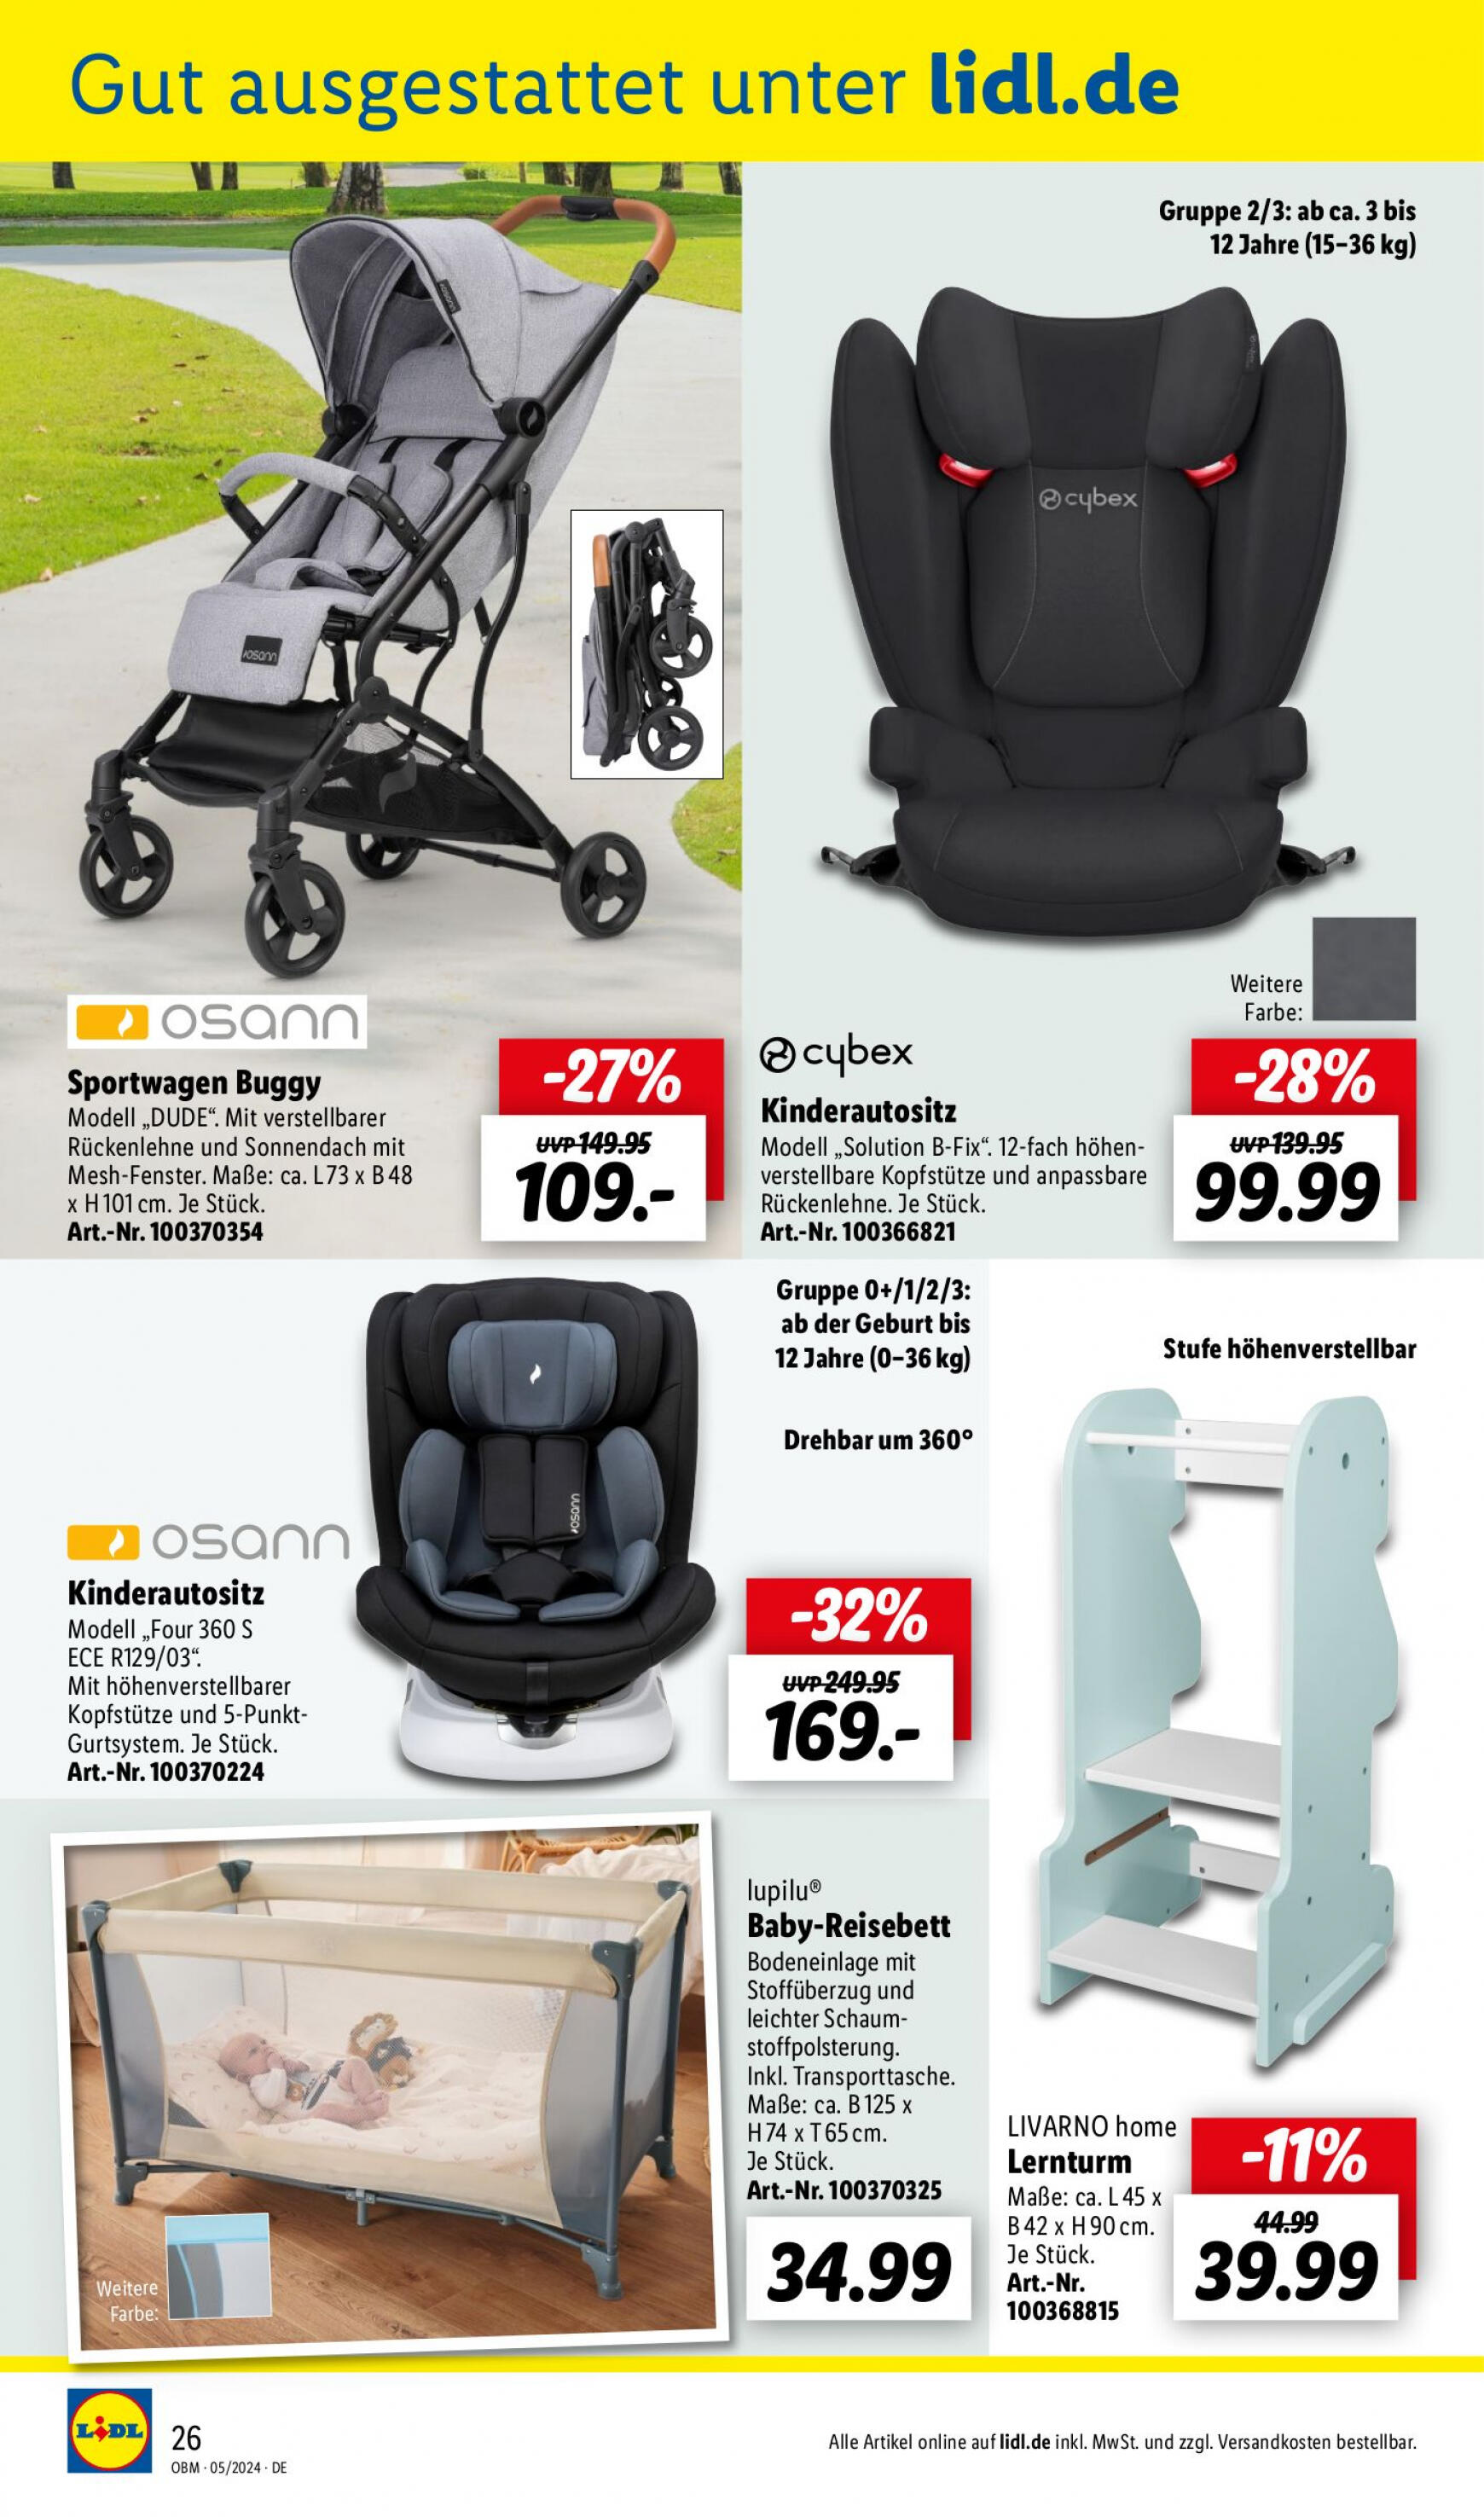 lidl - Flyer Lidl - Aktuelle Onlineshop-Highlights aktuell 01.05. - 31.05. - page: 26